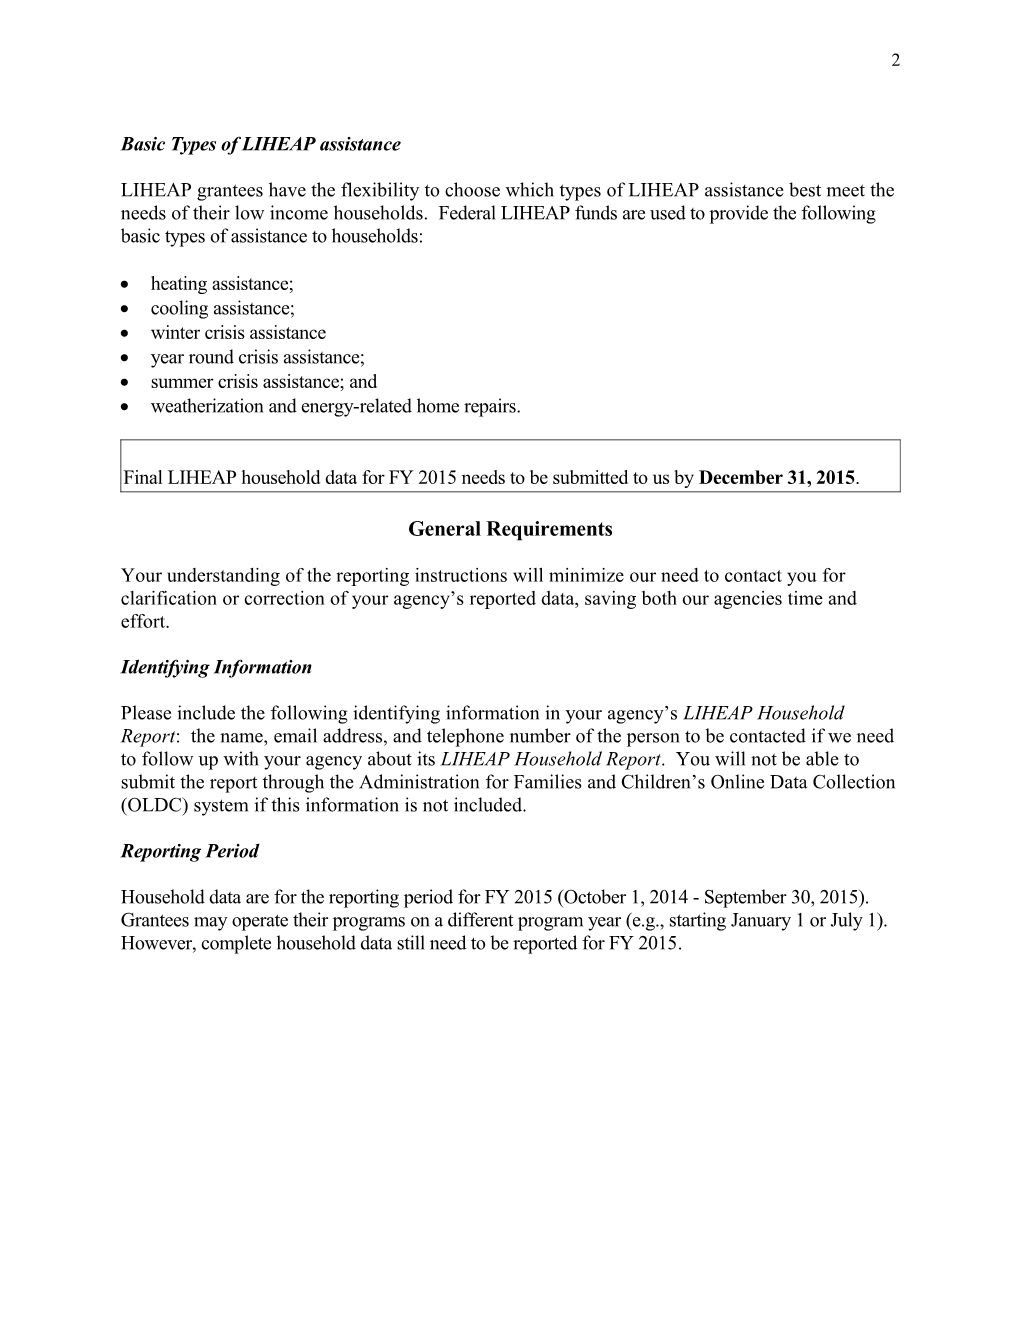 Federal LIHEAP Household Report Reporting Requirements